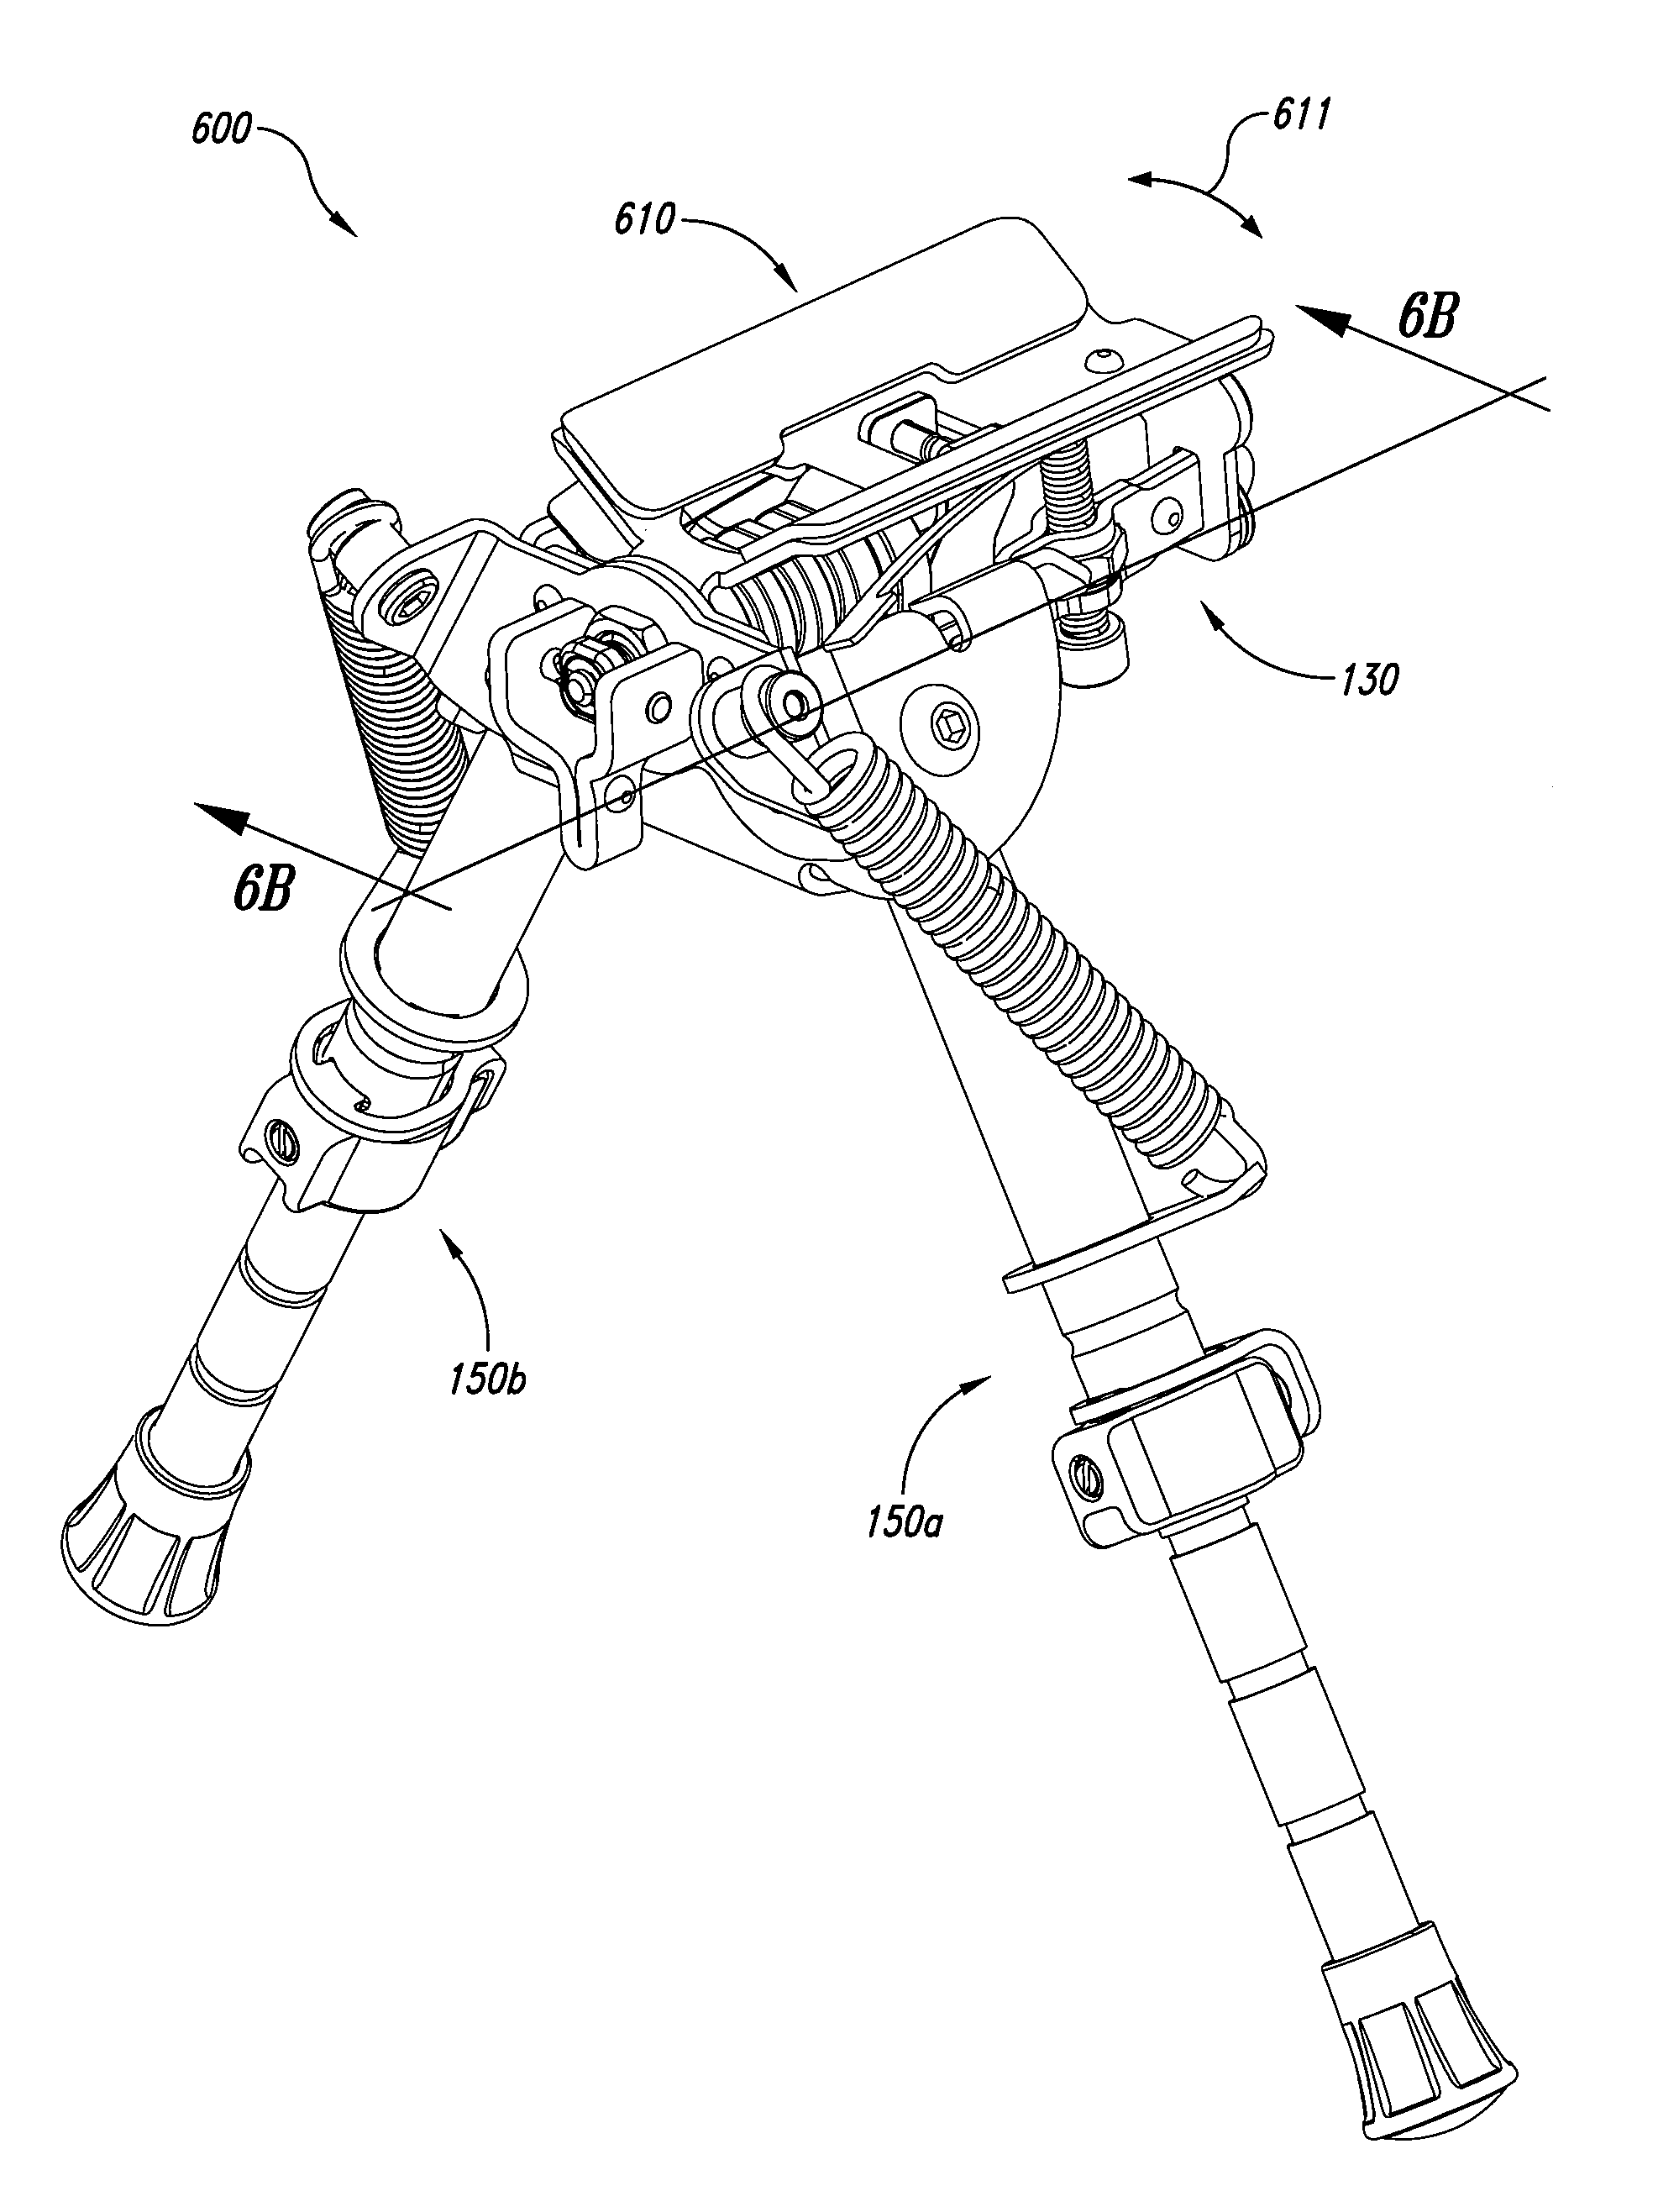 Adjustable firearm supports and associated methods of use and manufacture